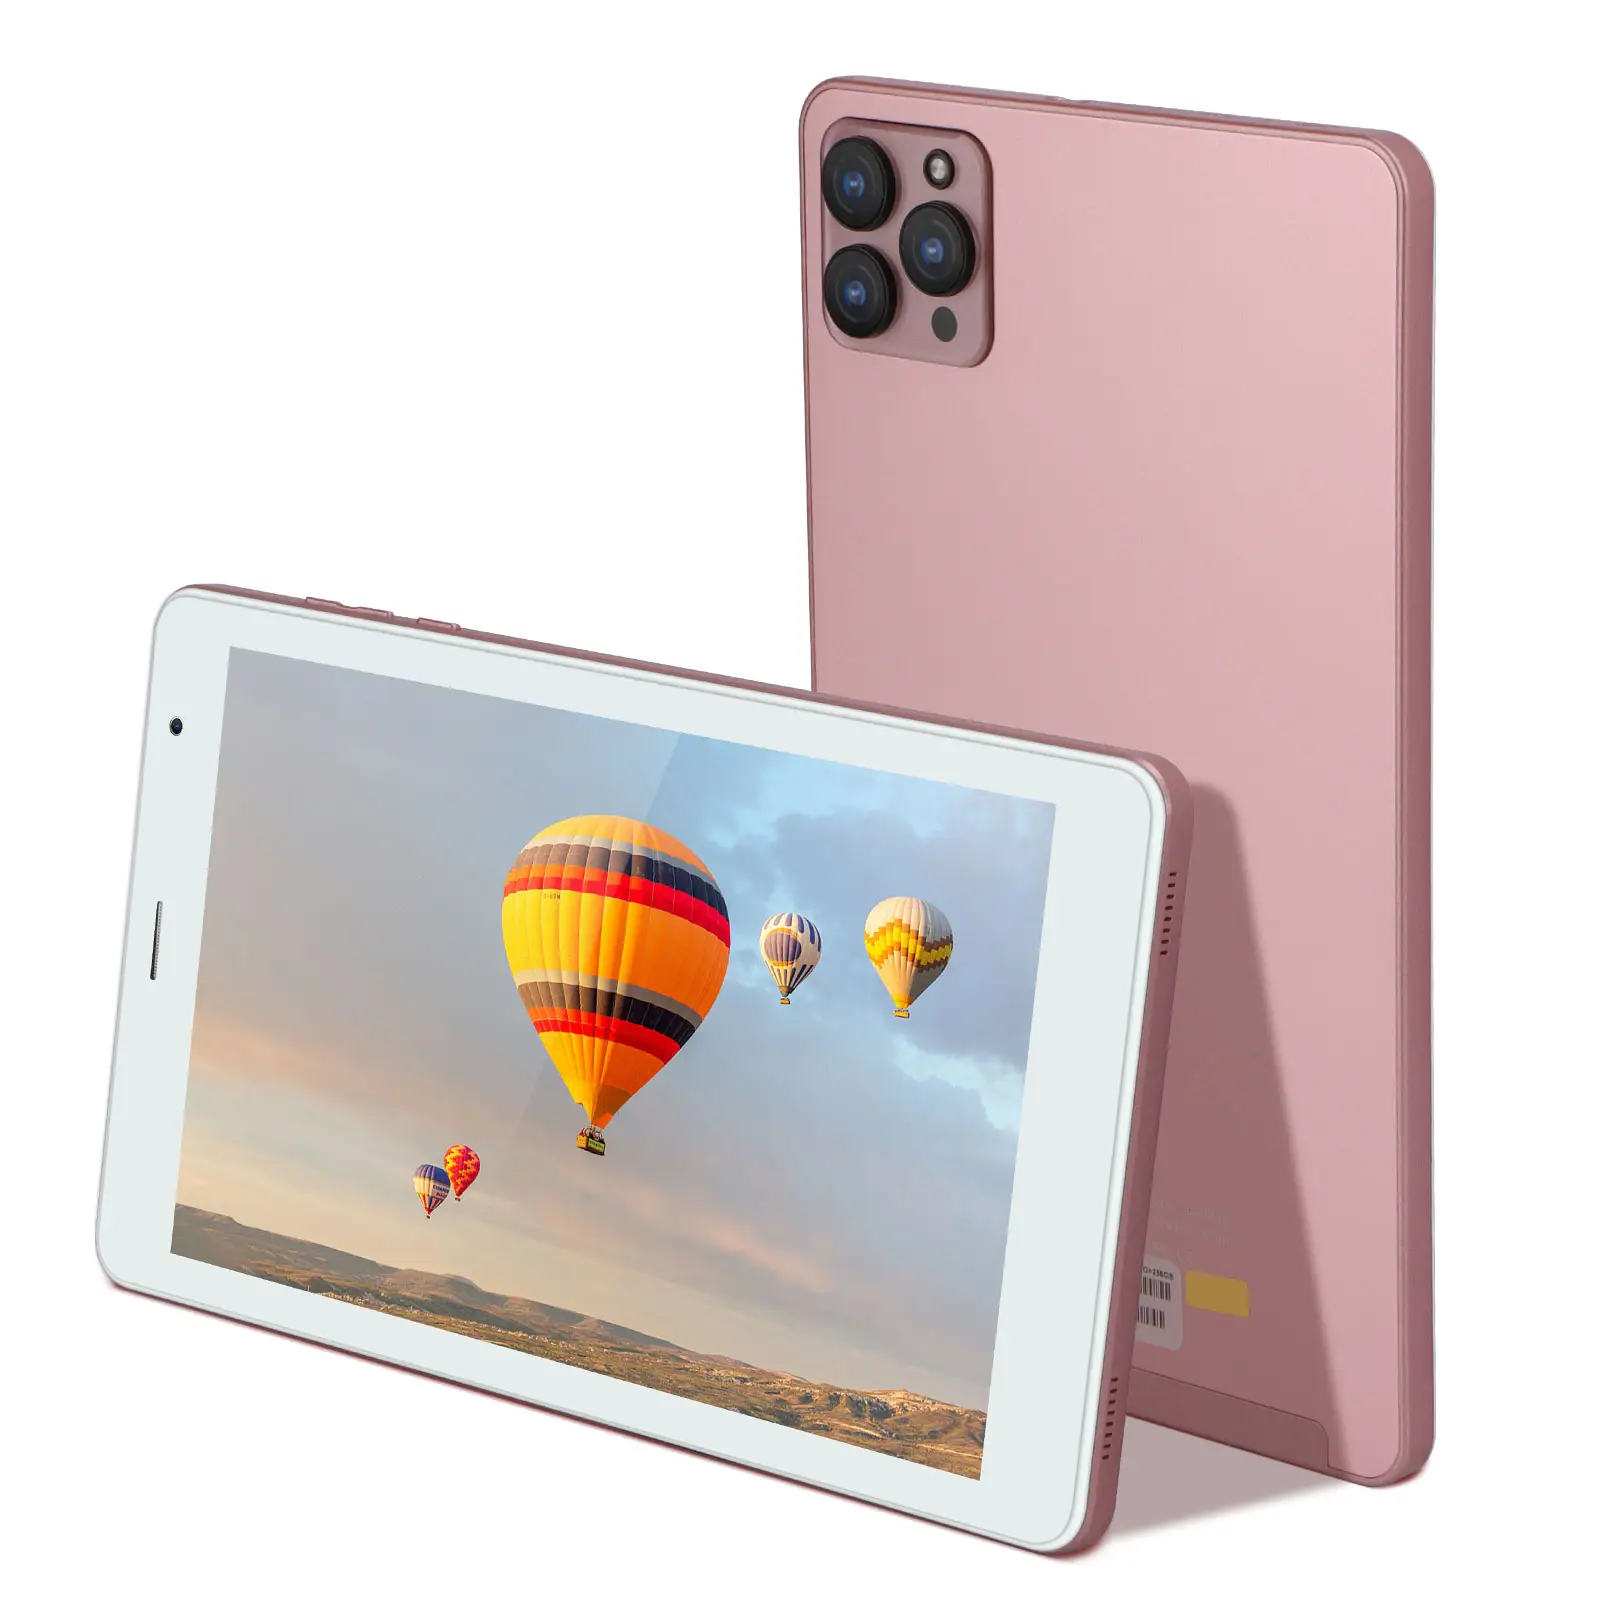 Factory OEM ODM with 6GB RAM 256GB ROM 8000mAh Battery Dual Camera IPS Screen for Adults 8 inch Pink Android 12 Tablet Pro